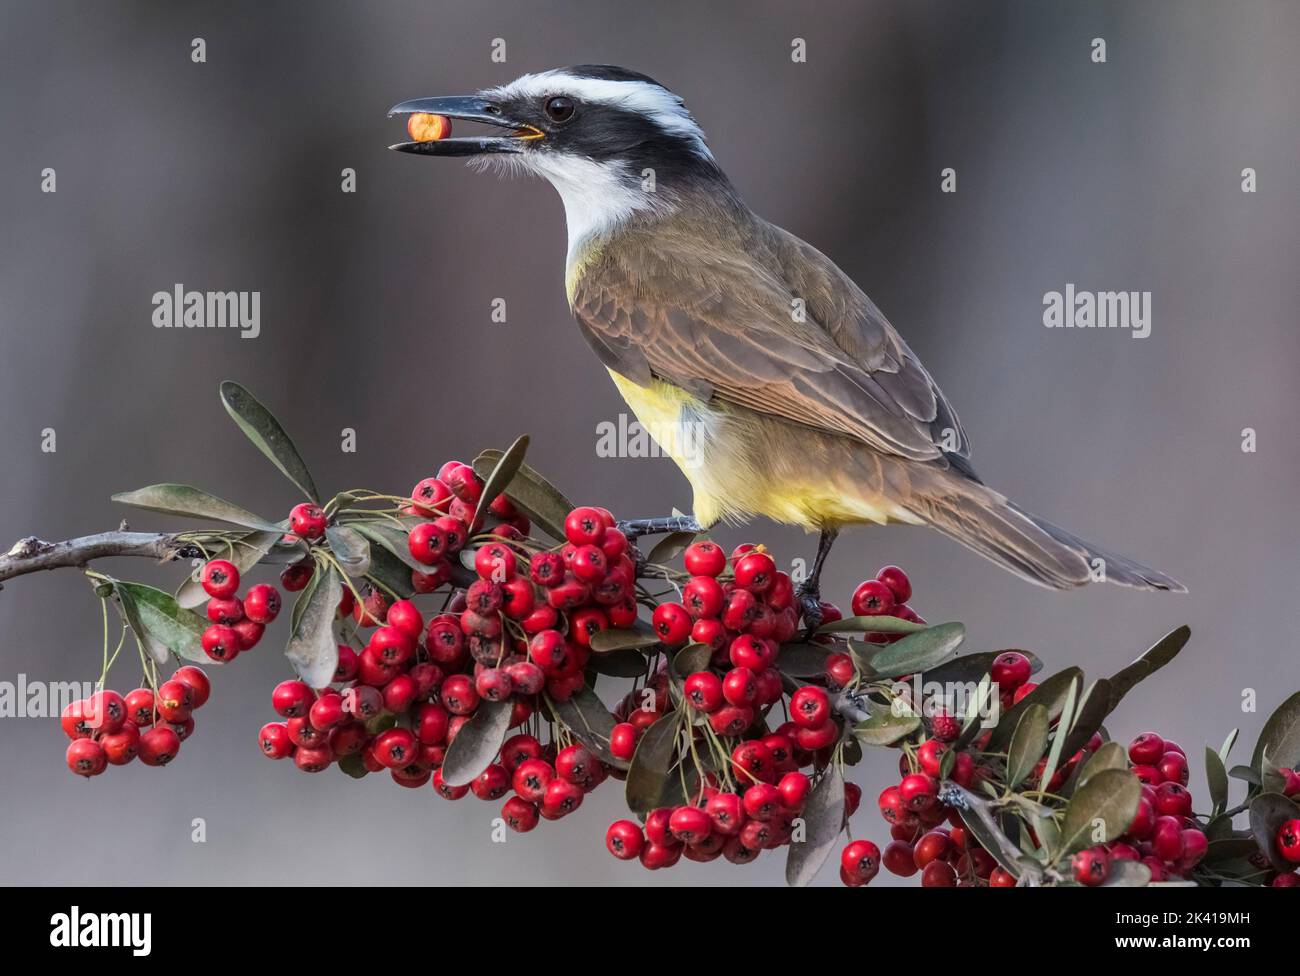 Great kiskadee  eating fruit from a plant.World heritage site Stock Photo